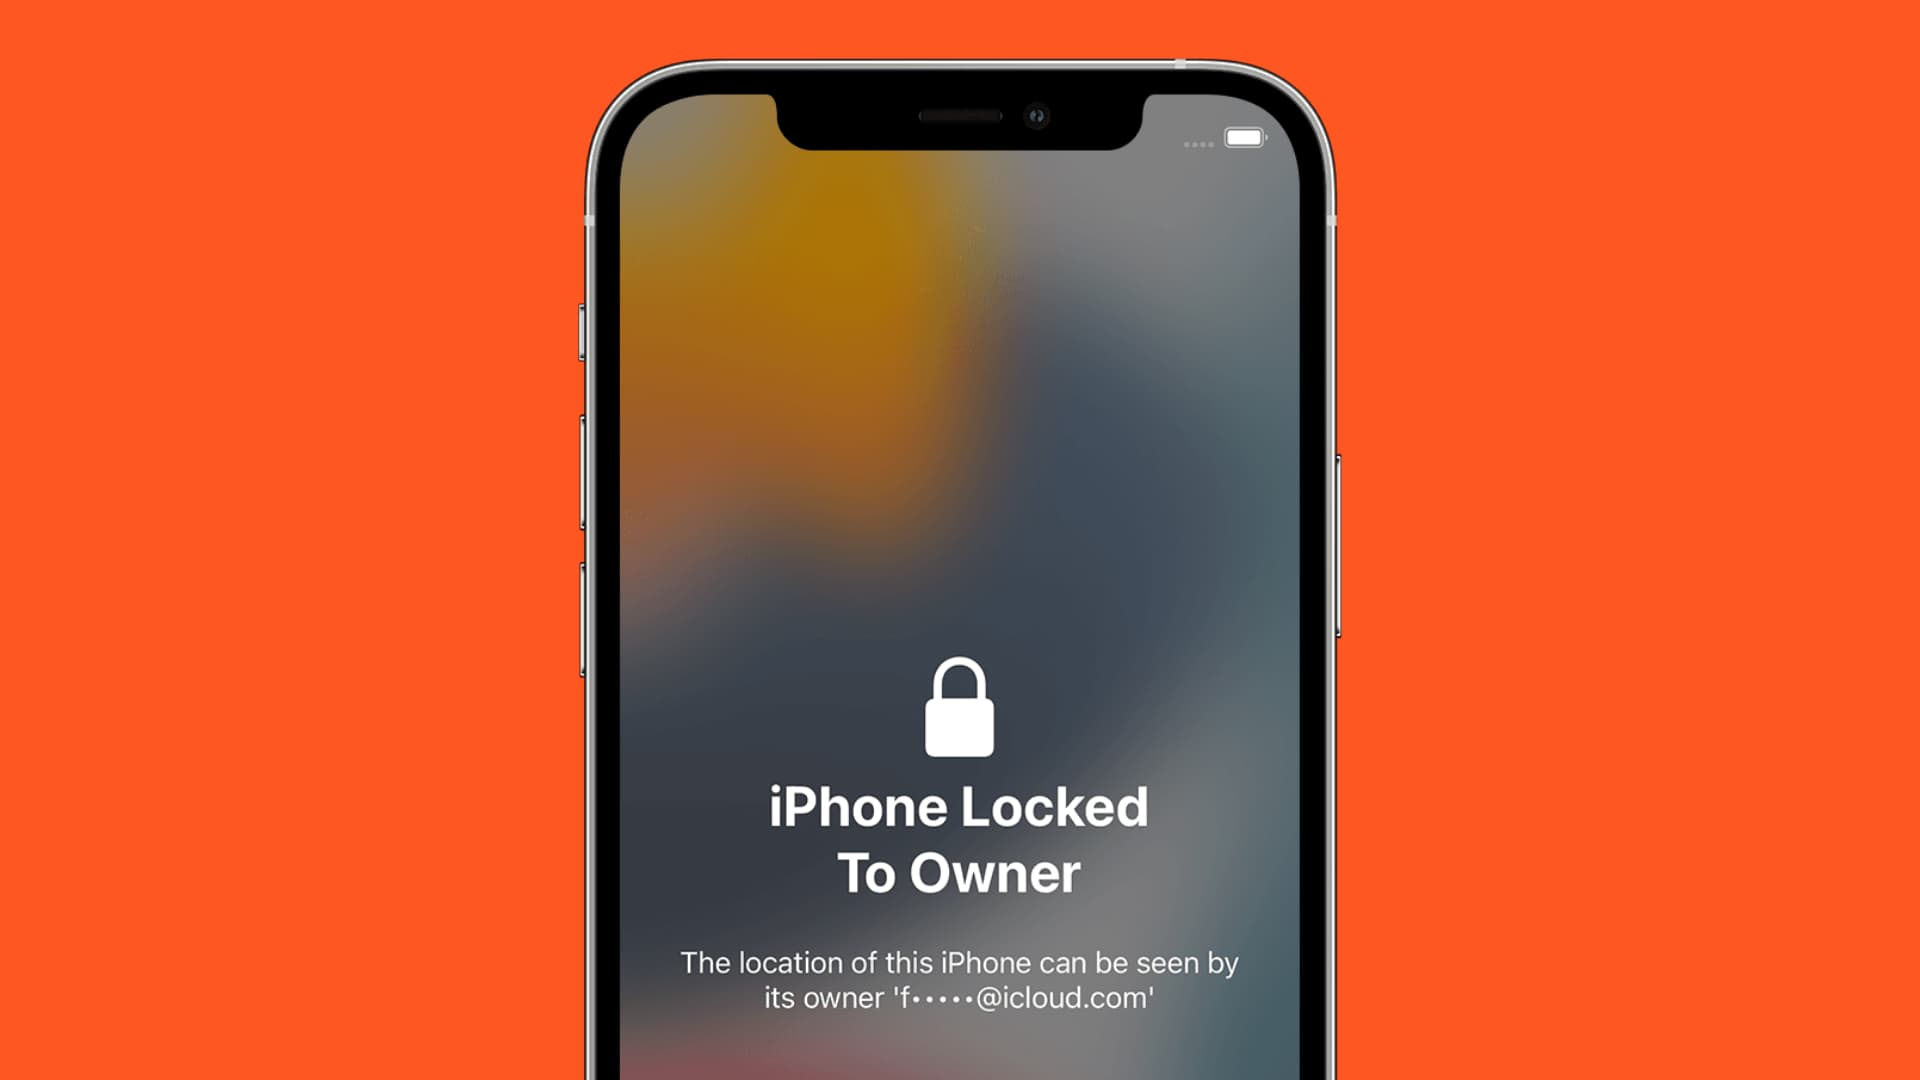 Check Activation Lock on iPhone